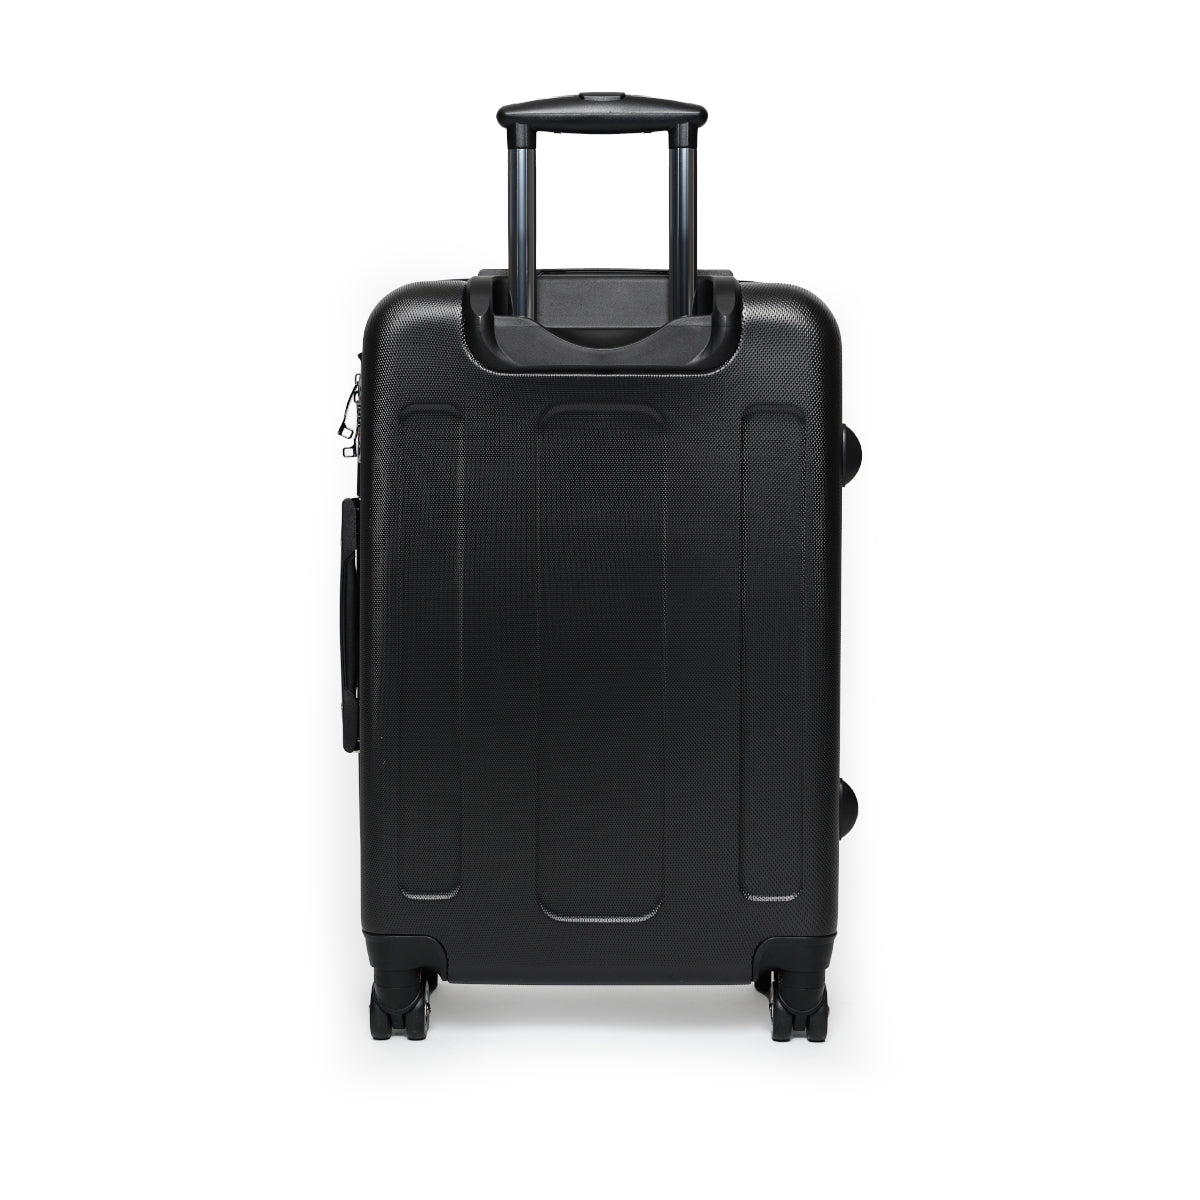  CARRY-ON LUGGAGE, ARTISTIC DESIGN, CABIN SUITCASE AND CHECK IN LUGGAGE, LUGGAGE FOR WOMEN, MEN